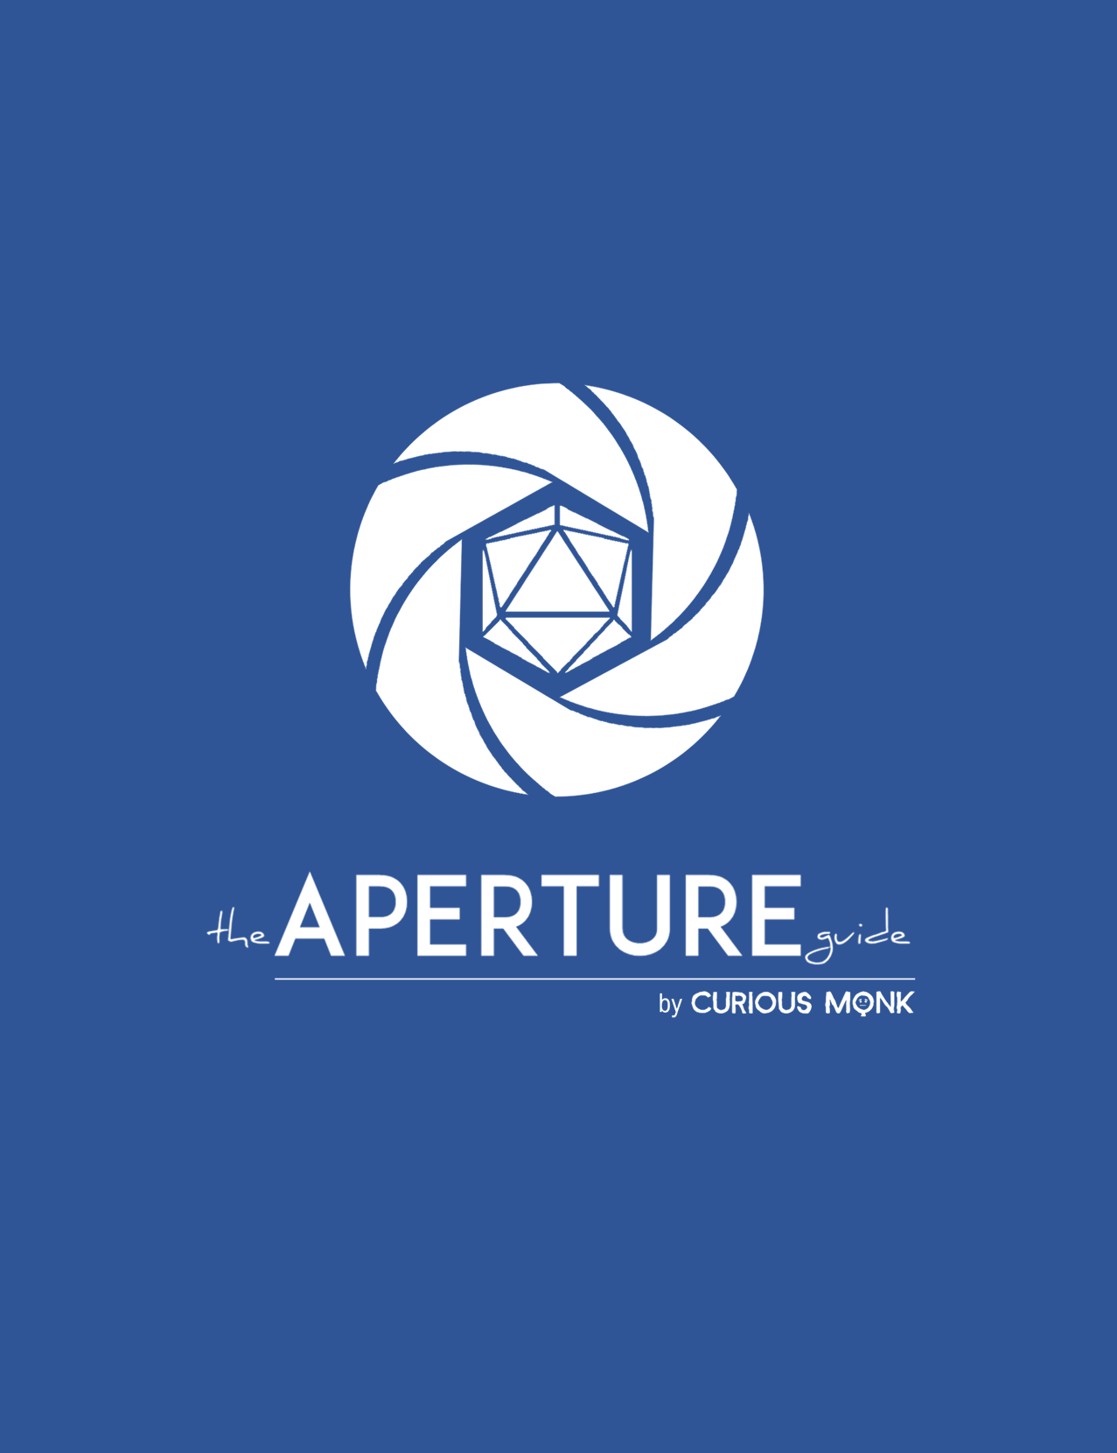 The APERTURE Guide